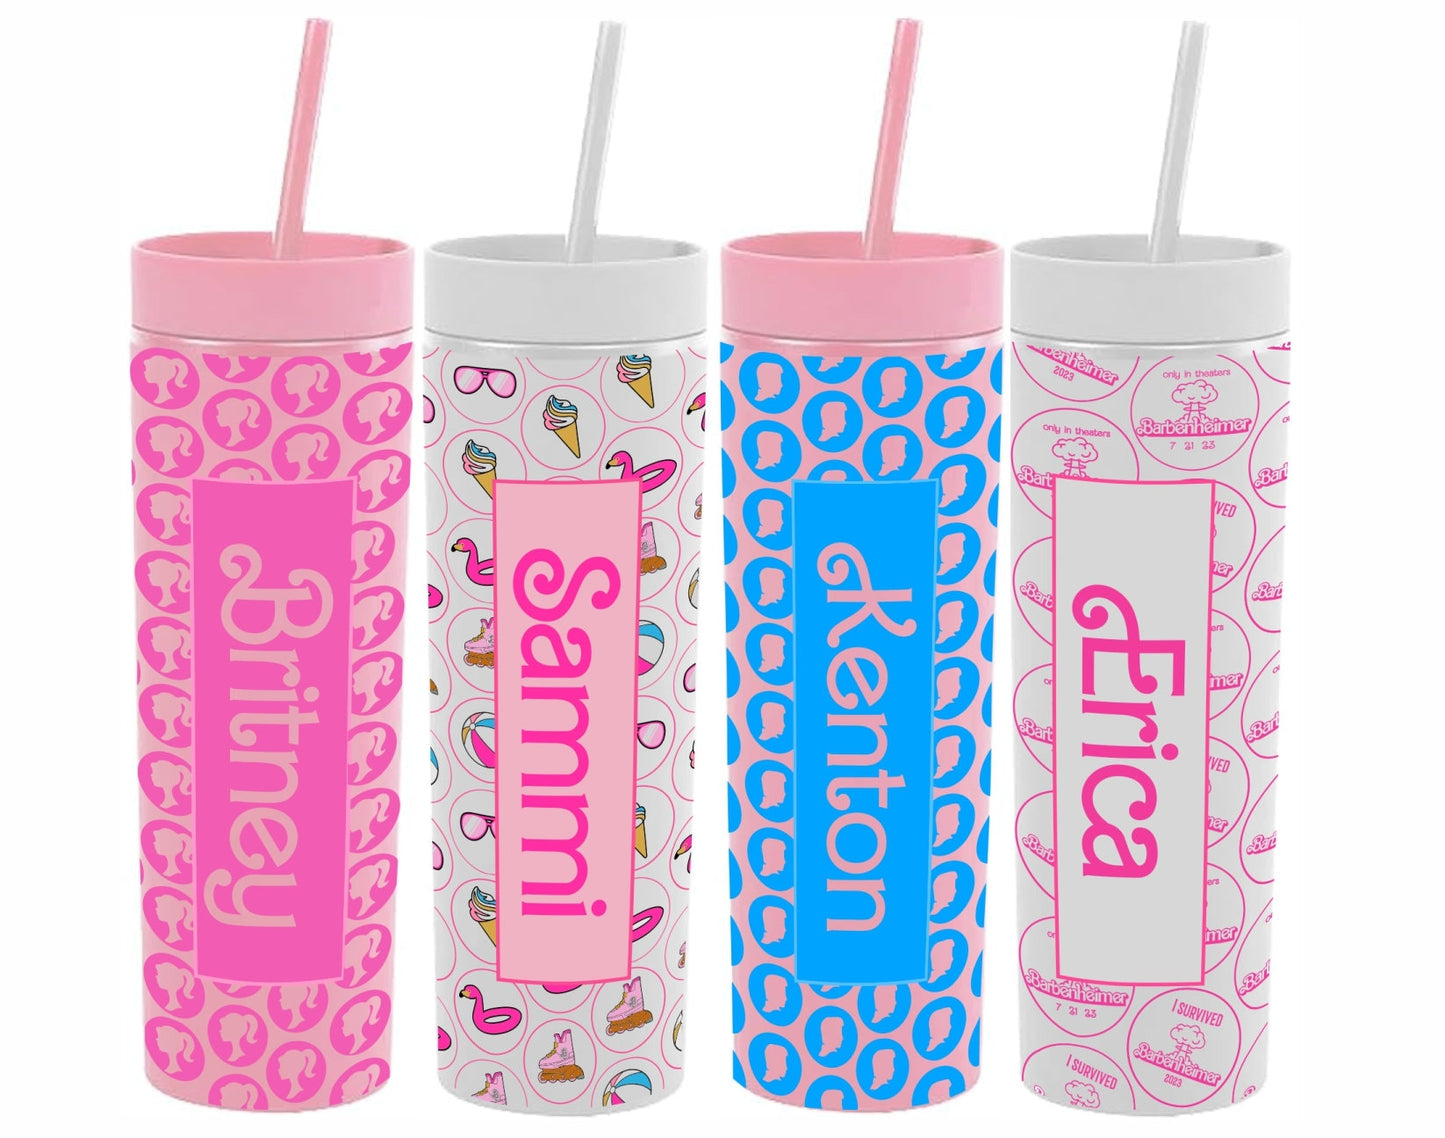 Monogrammed Let's Go Party Skinny Tumbler with Lid and Straw